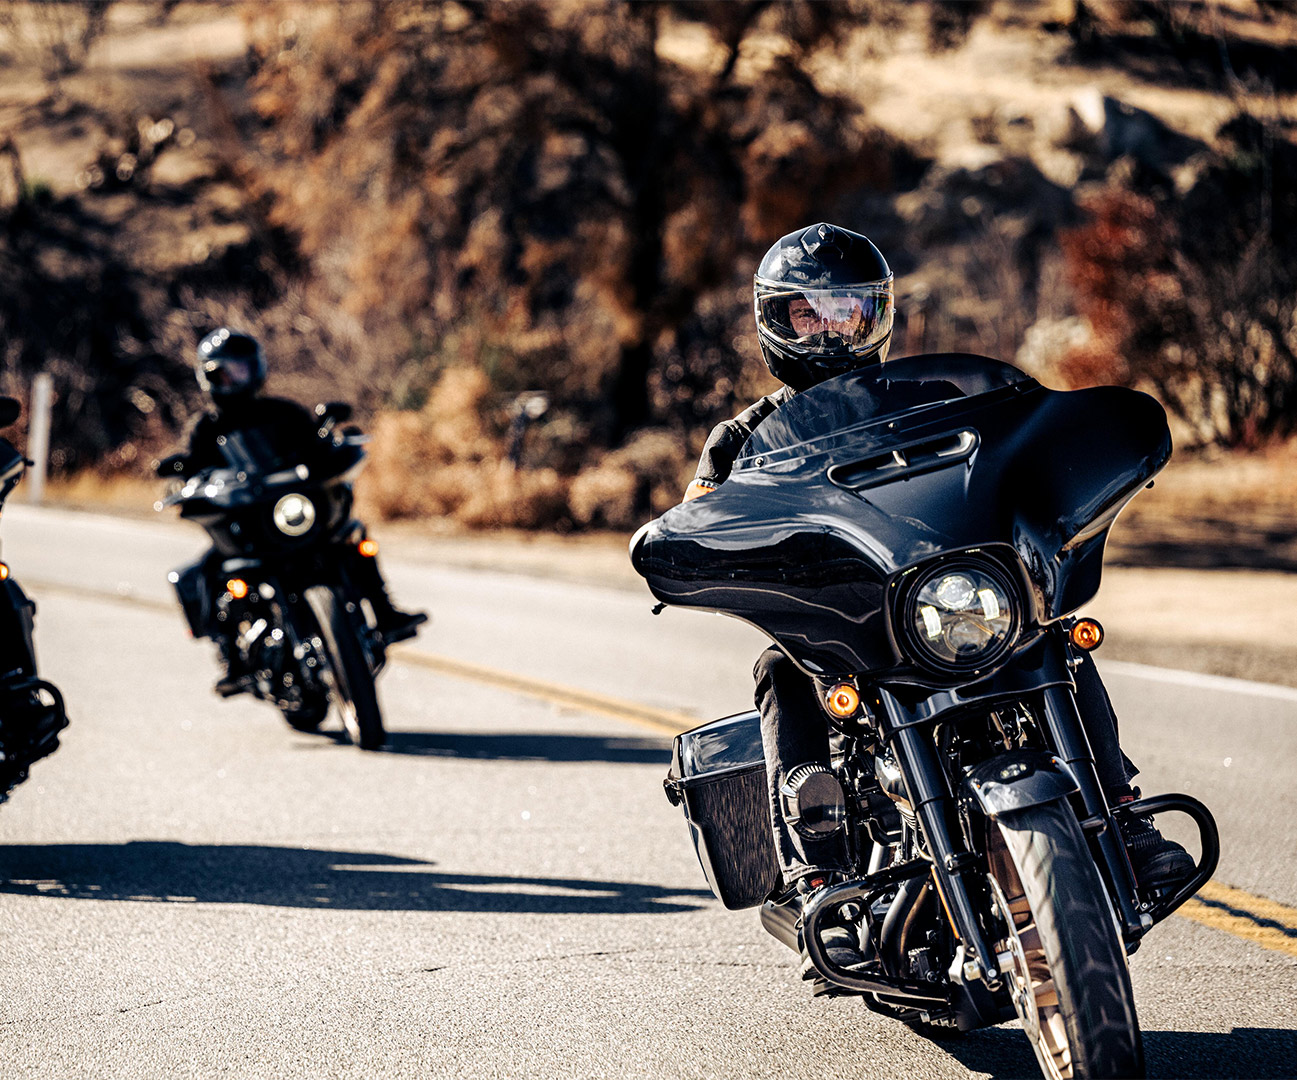 The all-new Harley-Davidson Street Glide ST Ride Out Roadtrip